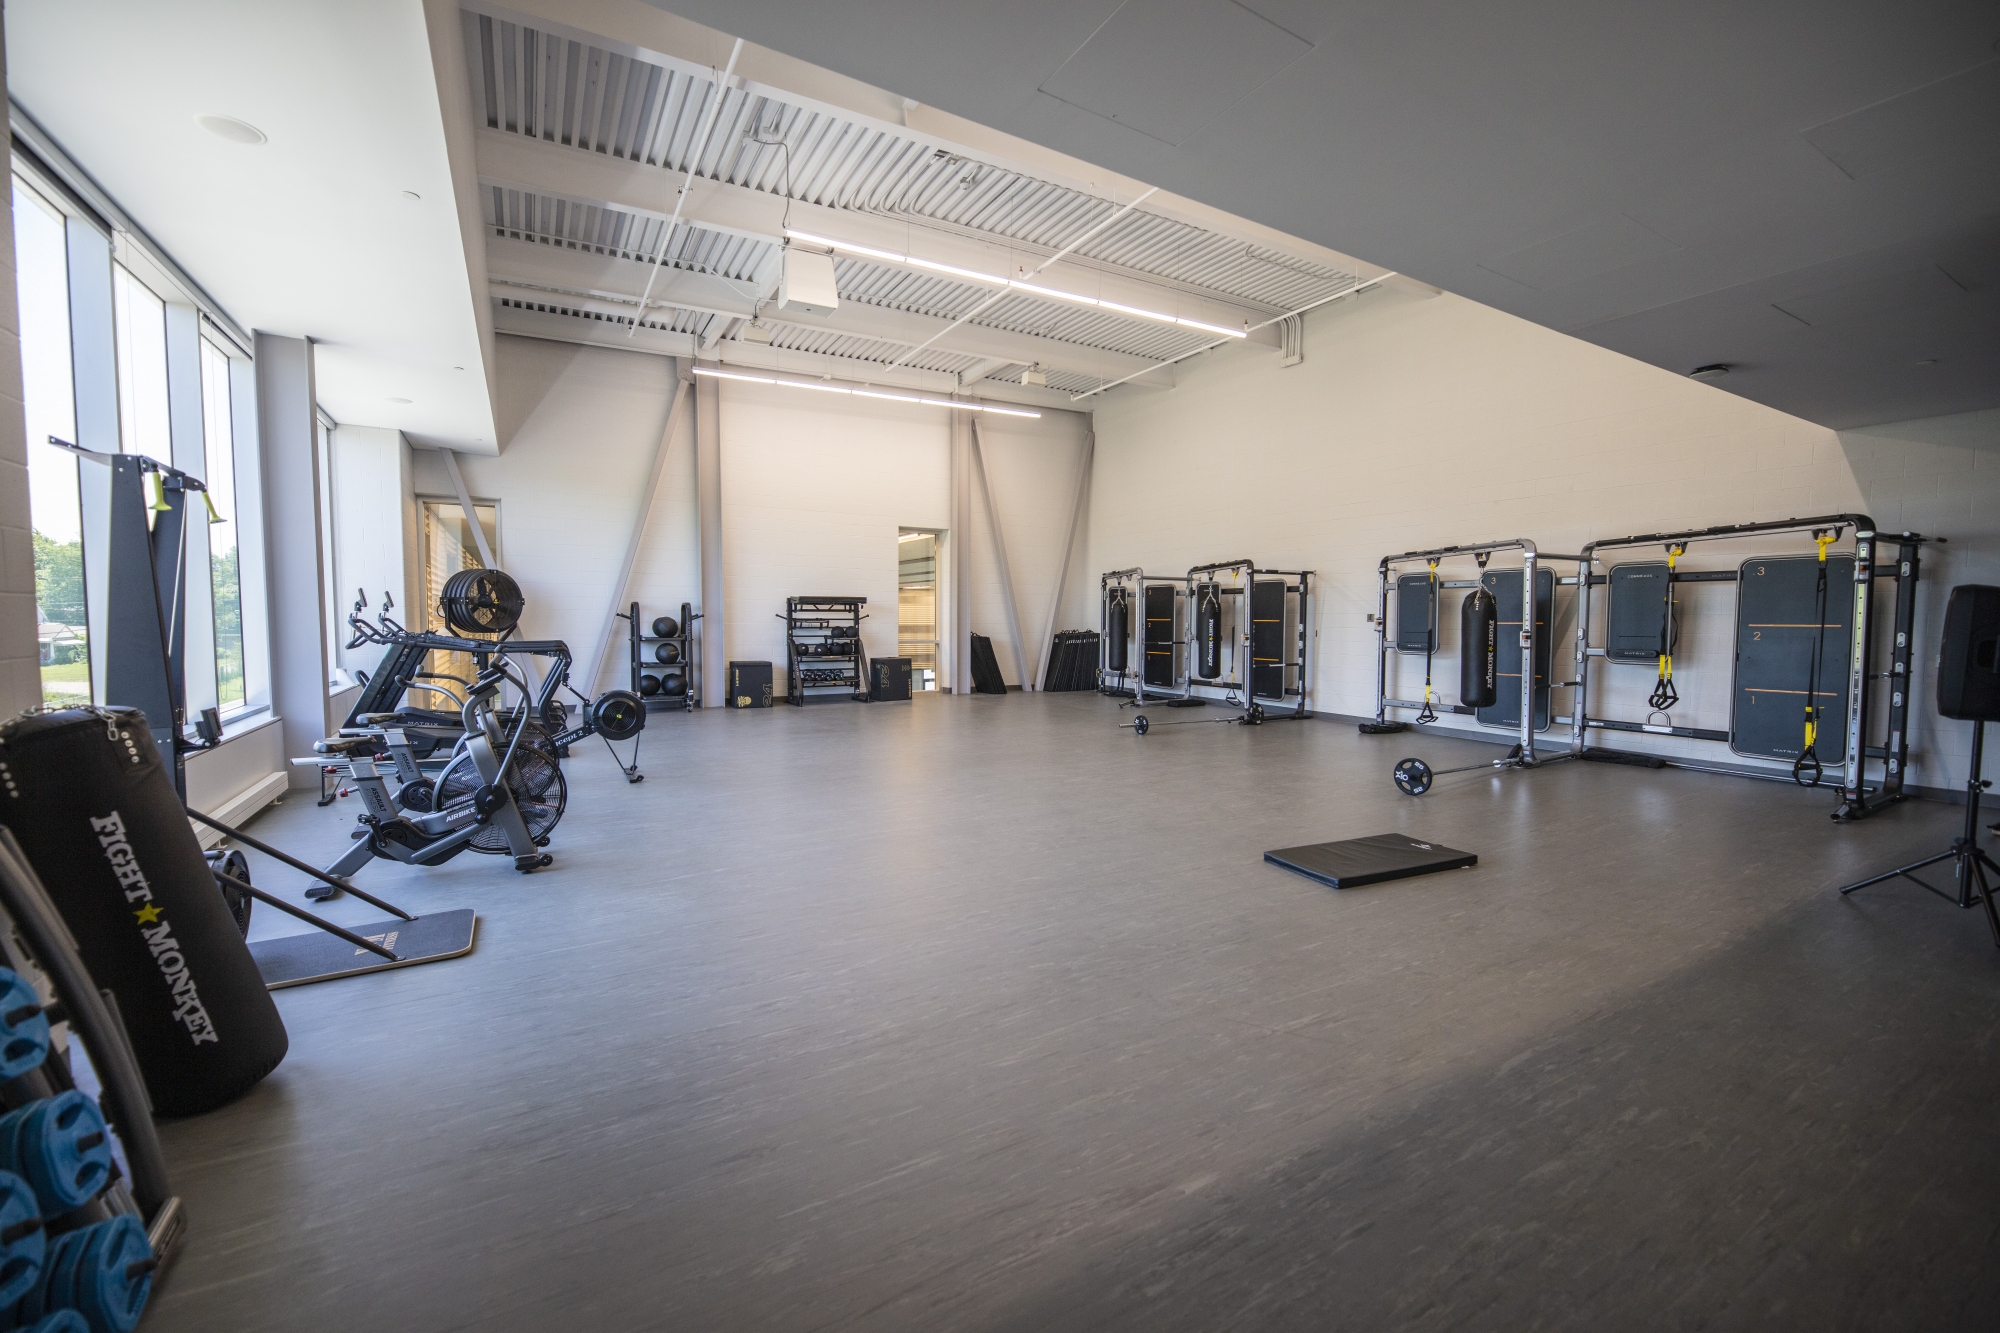 Room filled with various fitness equipment from TRX, treadmills and weights 